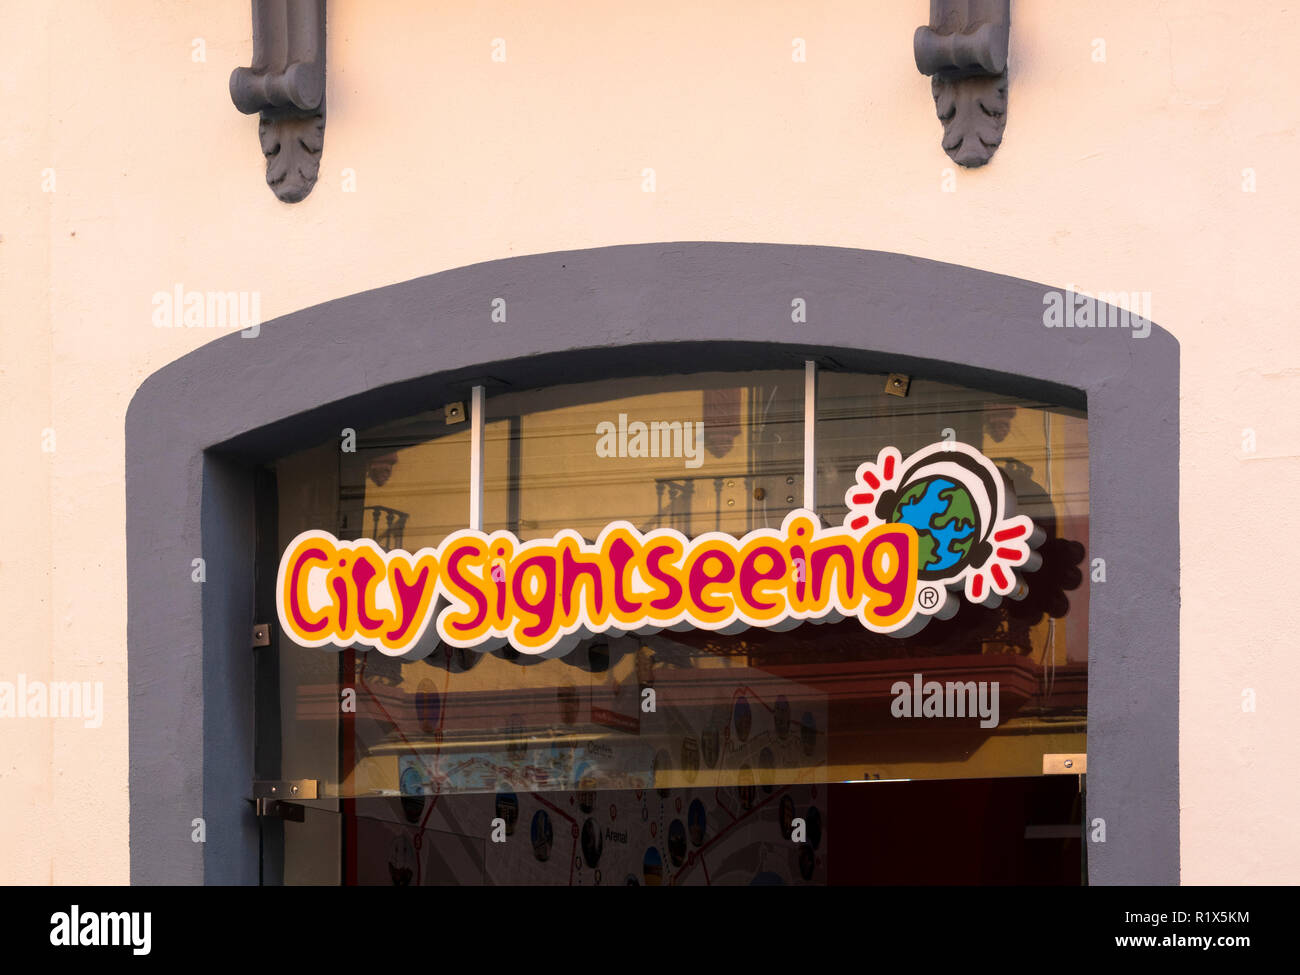 City Sightseeing sign in a window of a shop in Seville, Spain Stock Photo